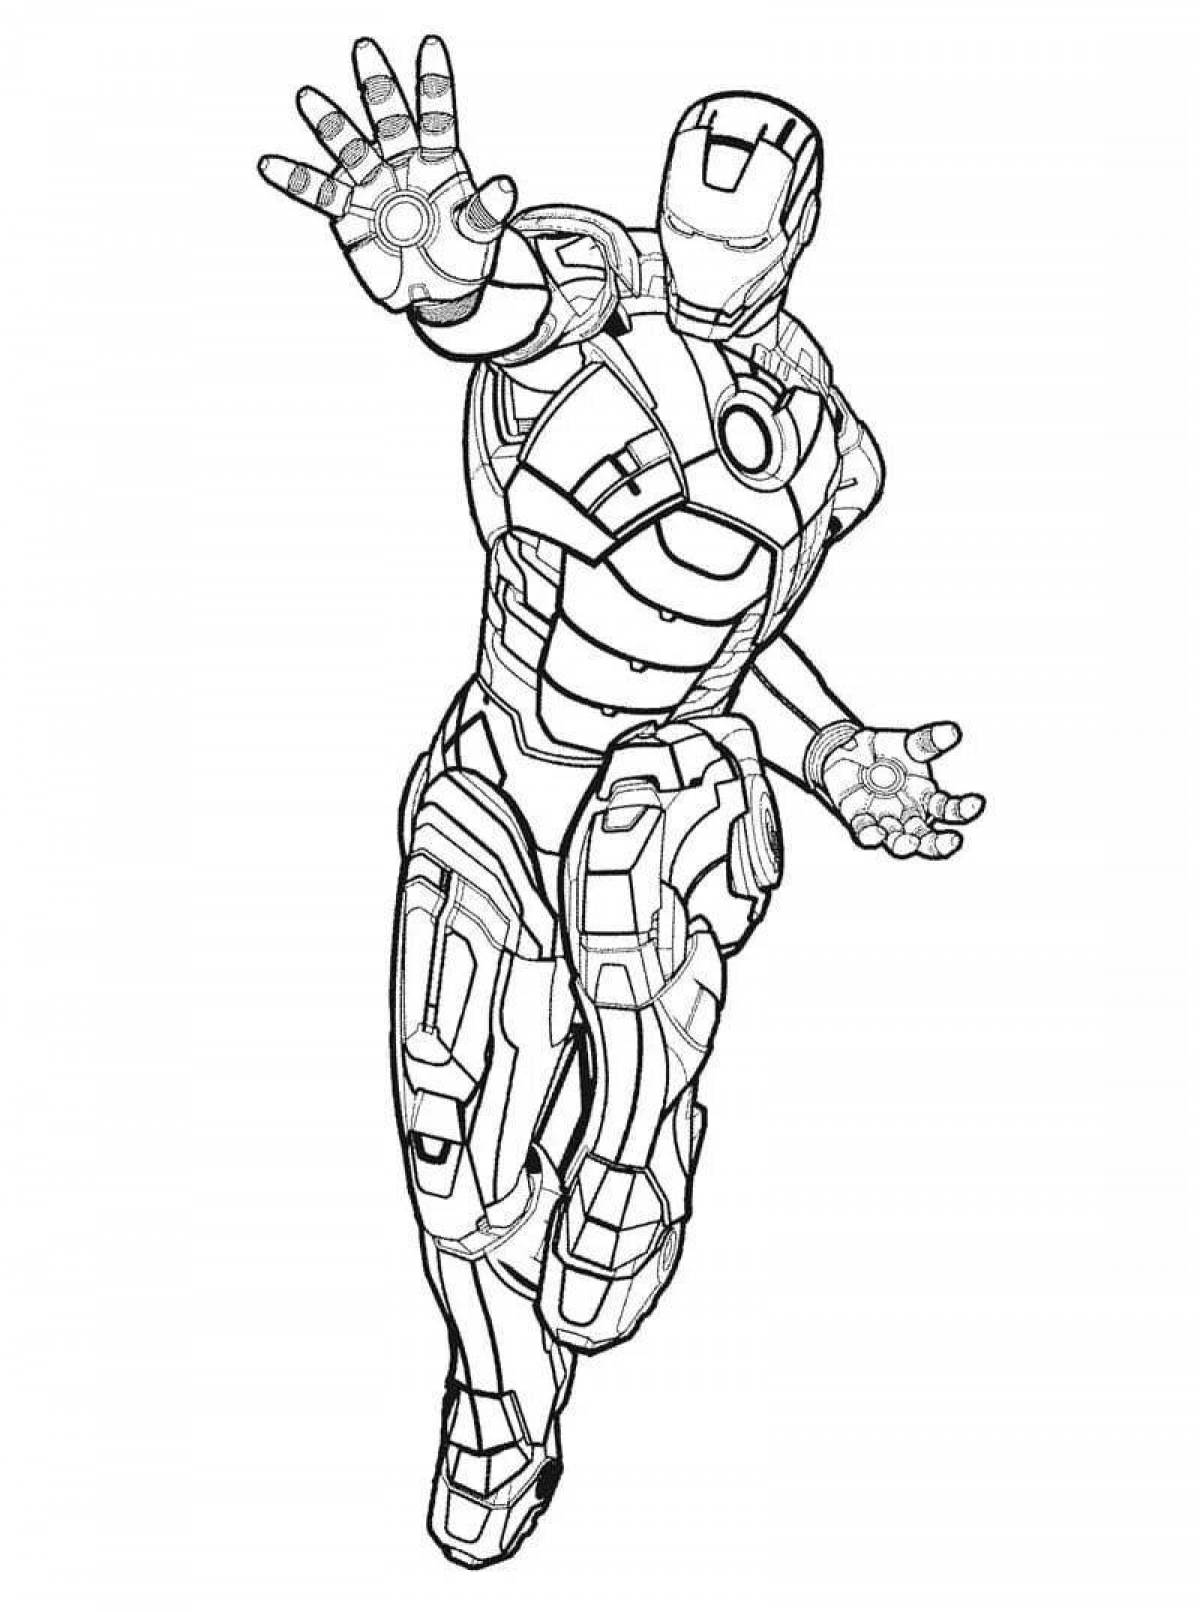 Flawless Iron coloring page